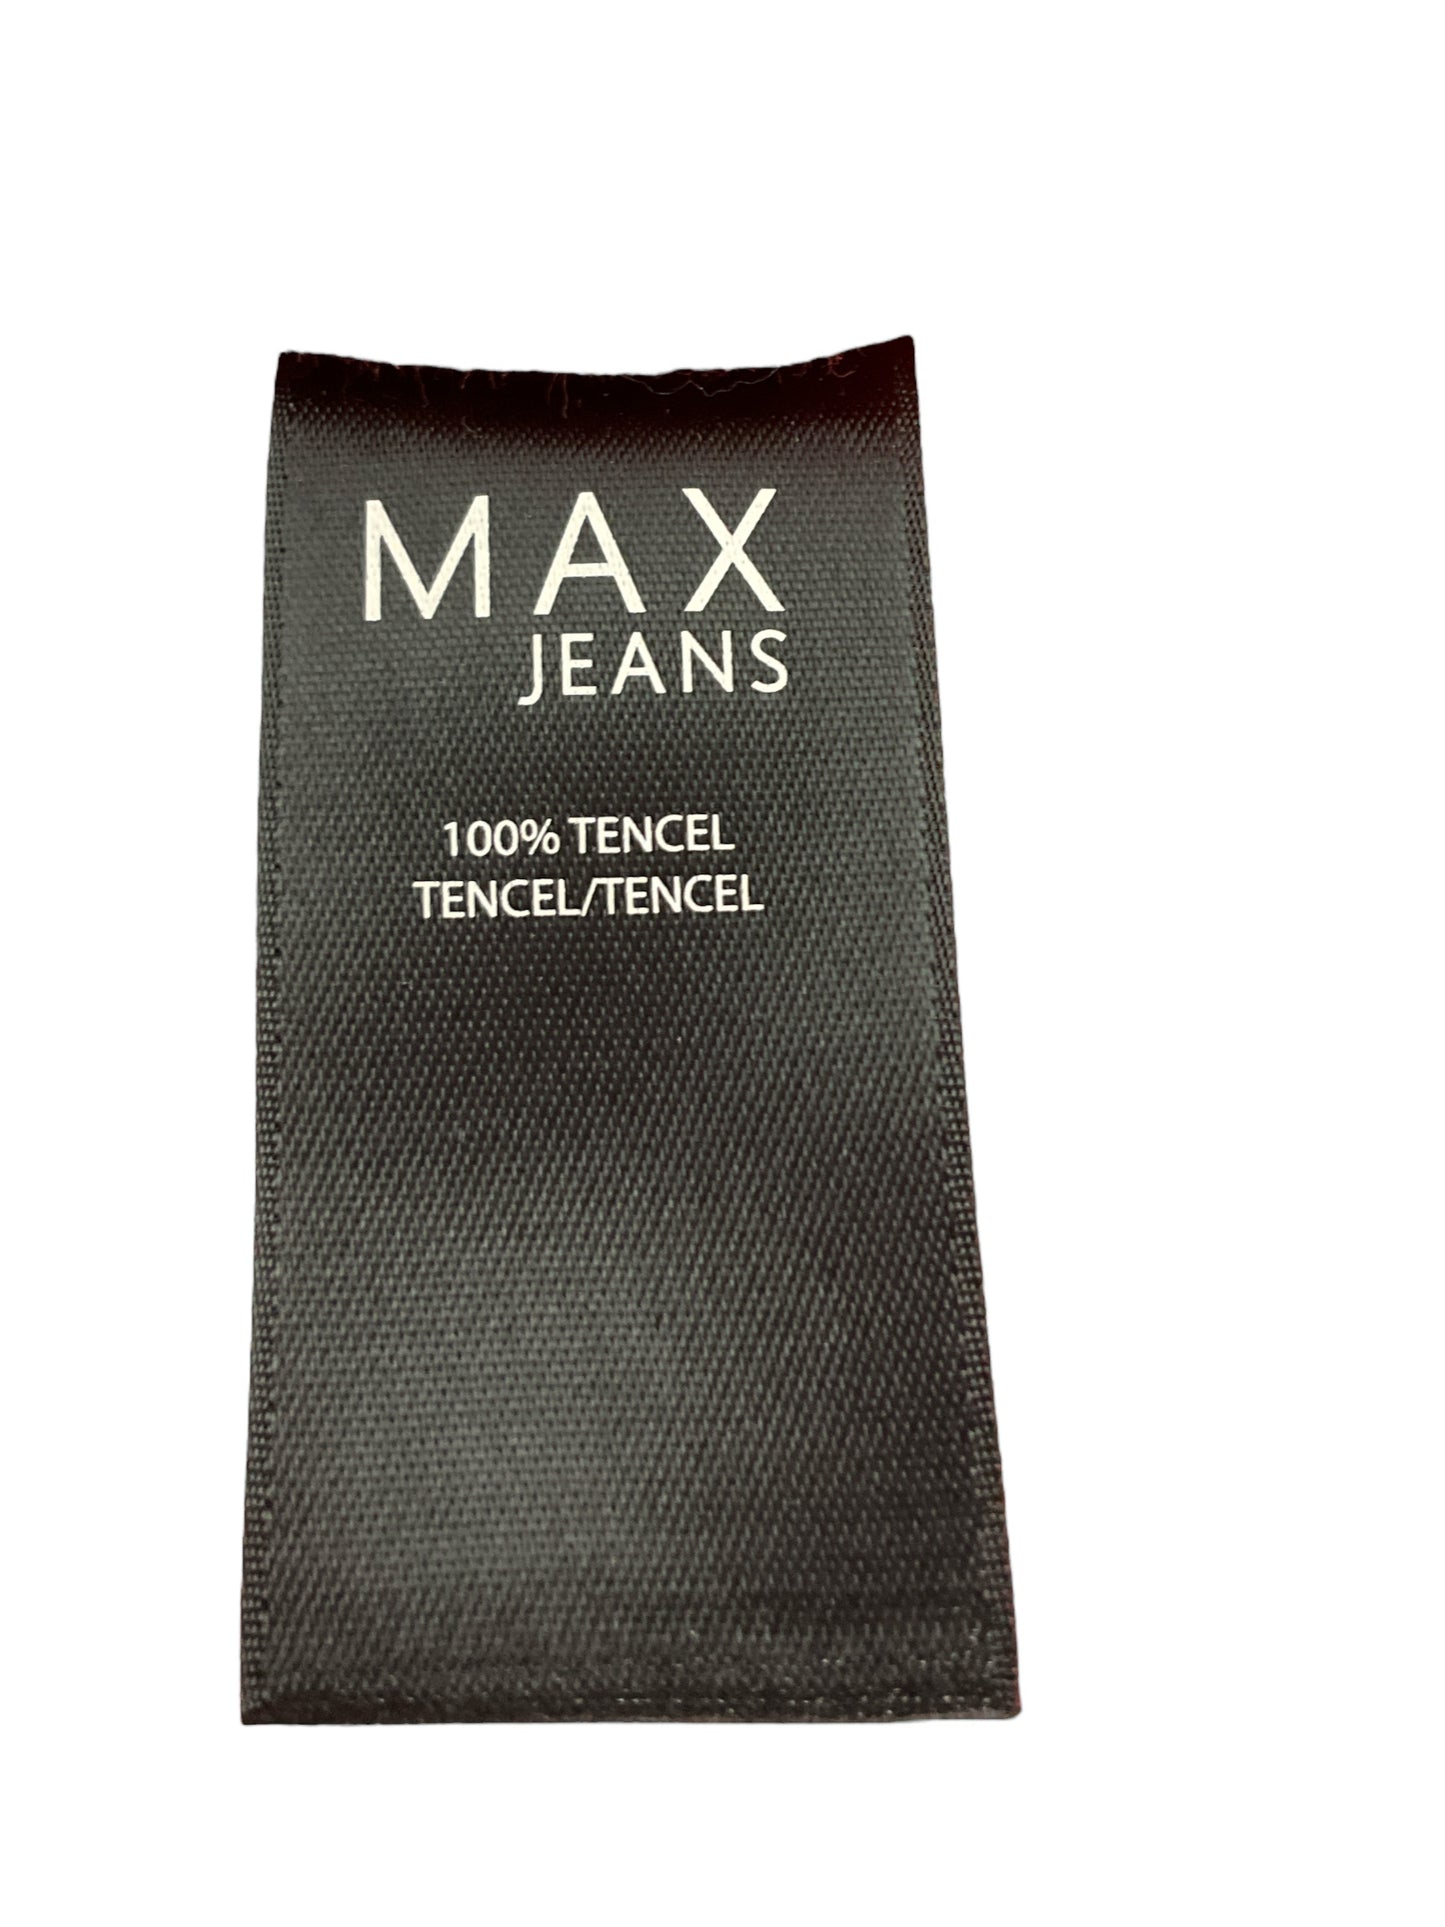 Jacket Other By Max Jeans  Size: S